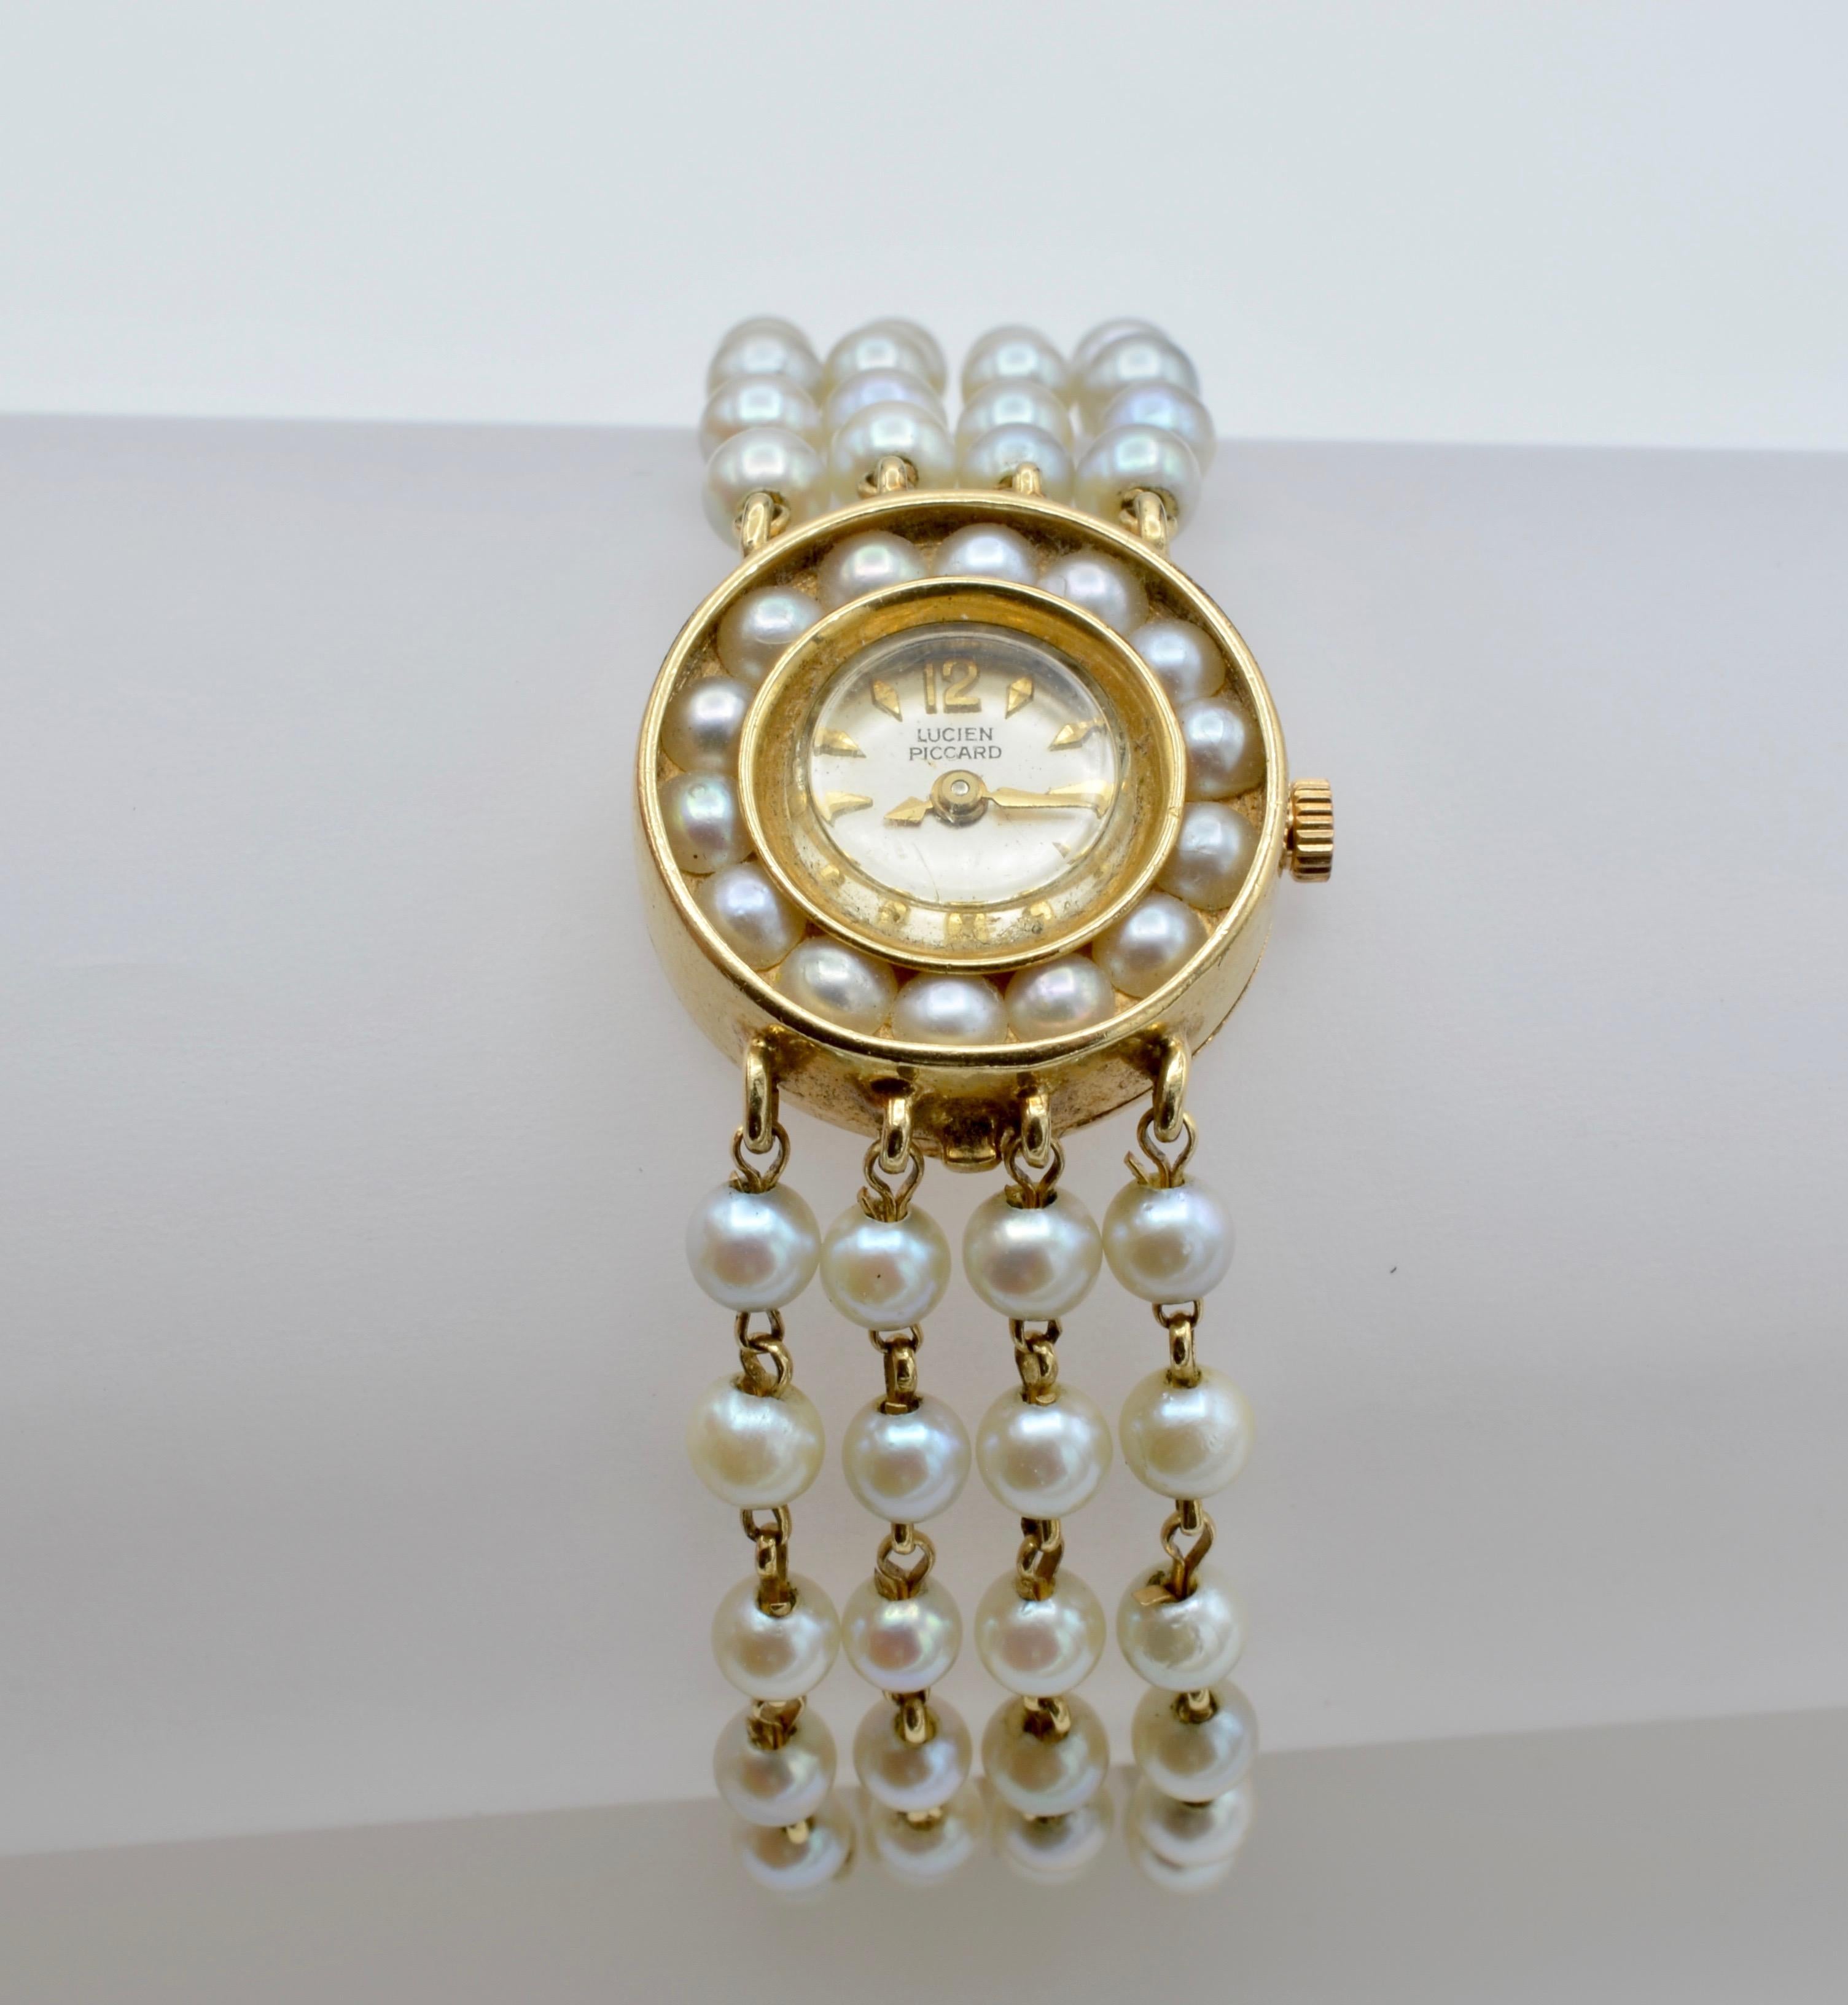 This lovely Lady watch bracelet is four strands of freshwater pearls hand wrapped in 14k with a watch face embedded with pearls. The clasp is beautifully designed with a safety chain. This is a great watch to layer with other bracelets for a casual